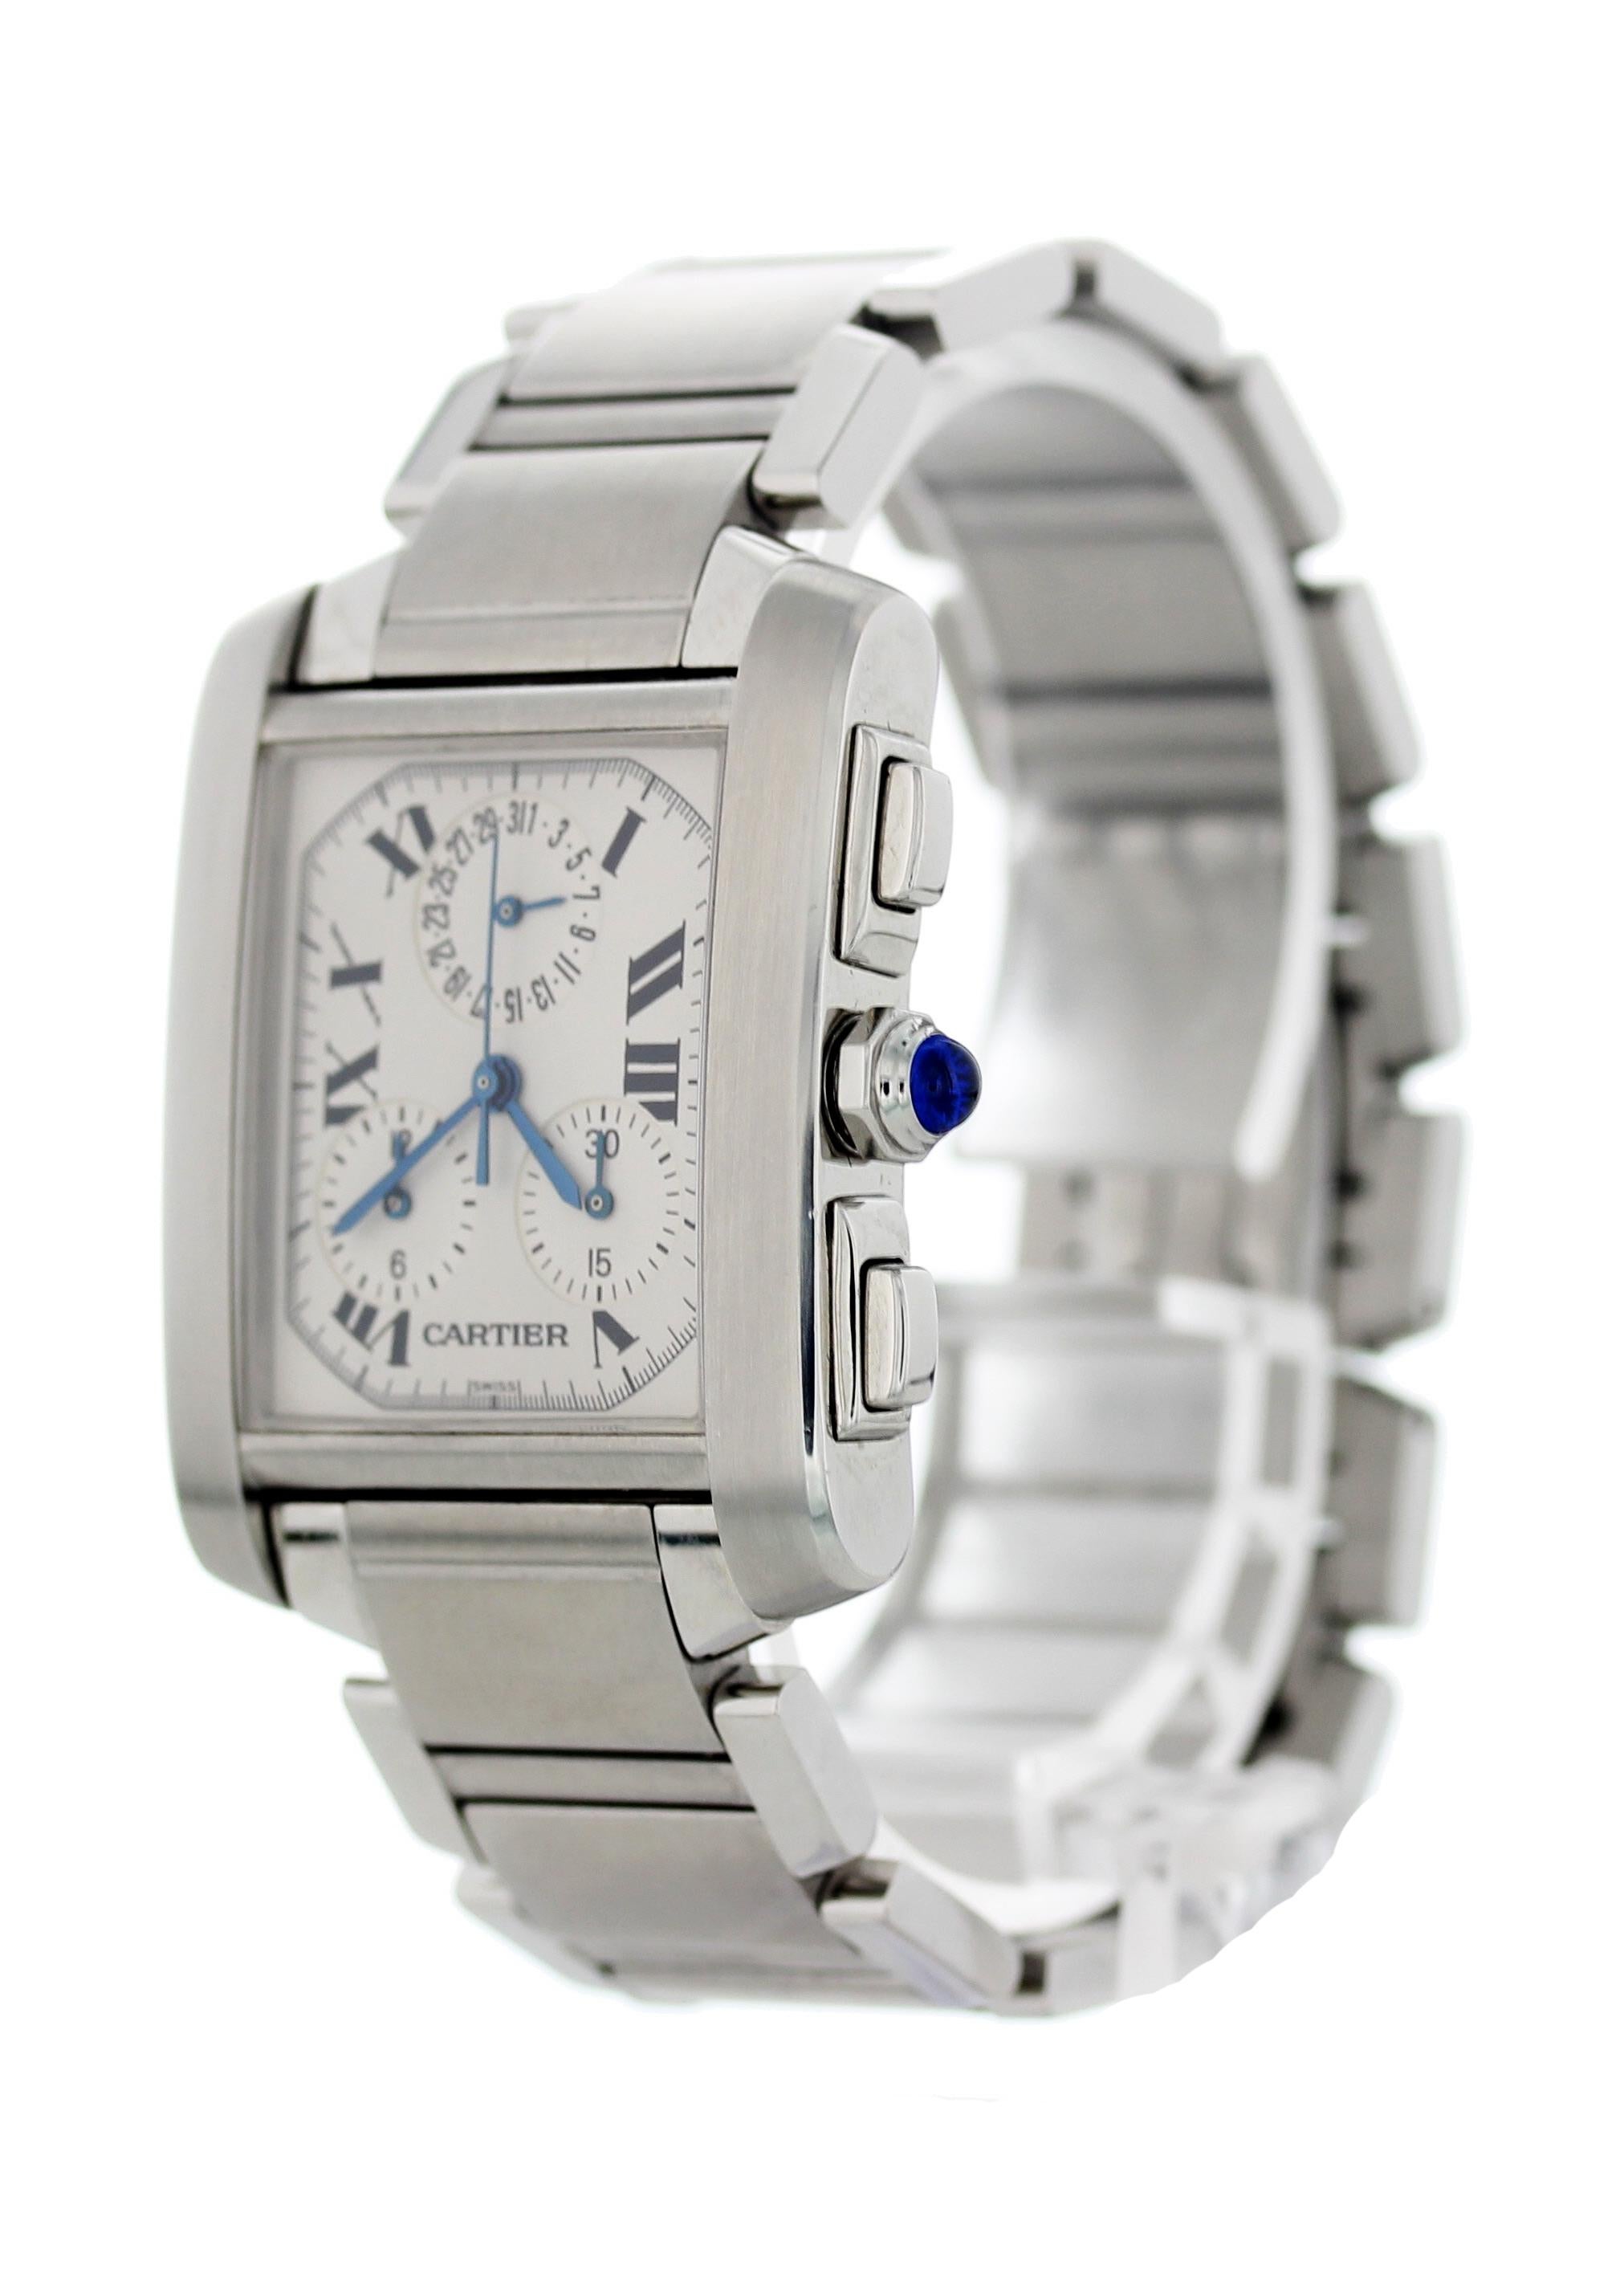 Cartier Tank Francaise Chronograph 2303 Mens Watch. 28mm stainless steel case. White dial with blue steel hands black Roman numerals. Three sub-dials displaying date, minutes and hours. Stainless steel bracelet with butterfly clasp. Will fit up to a